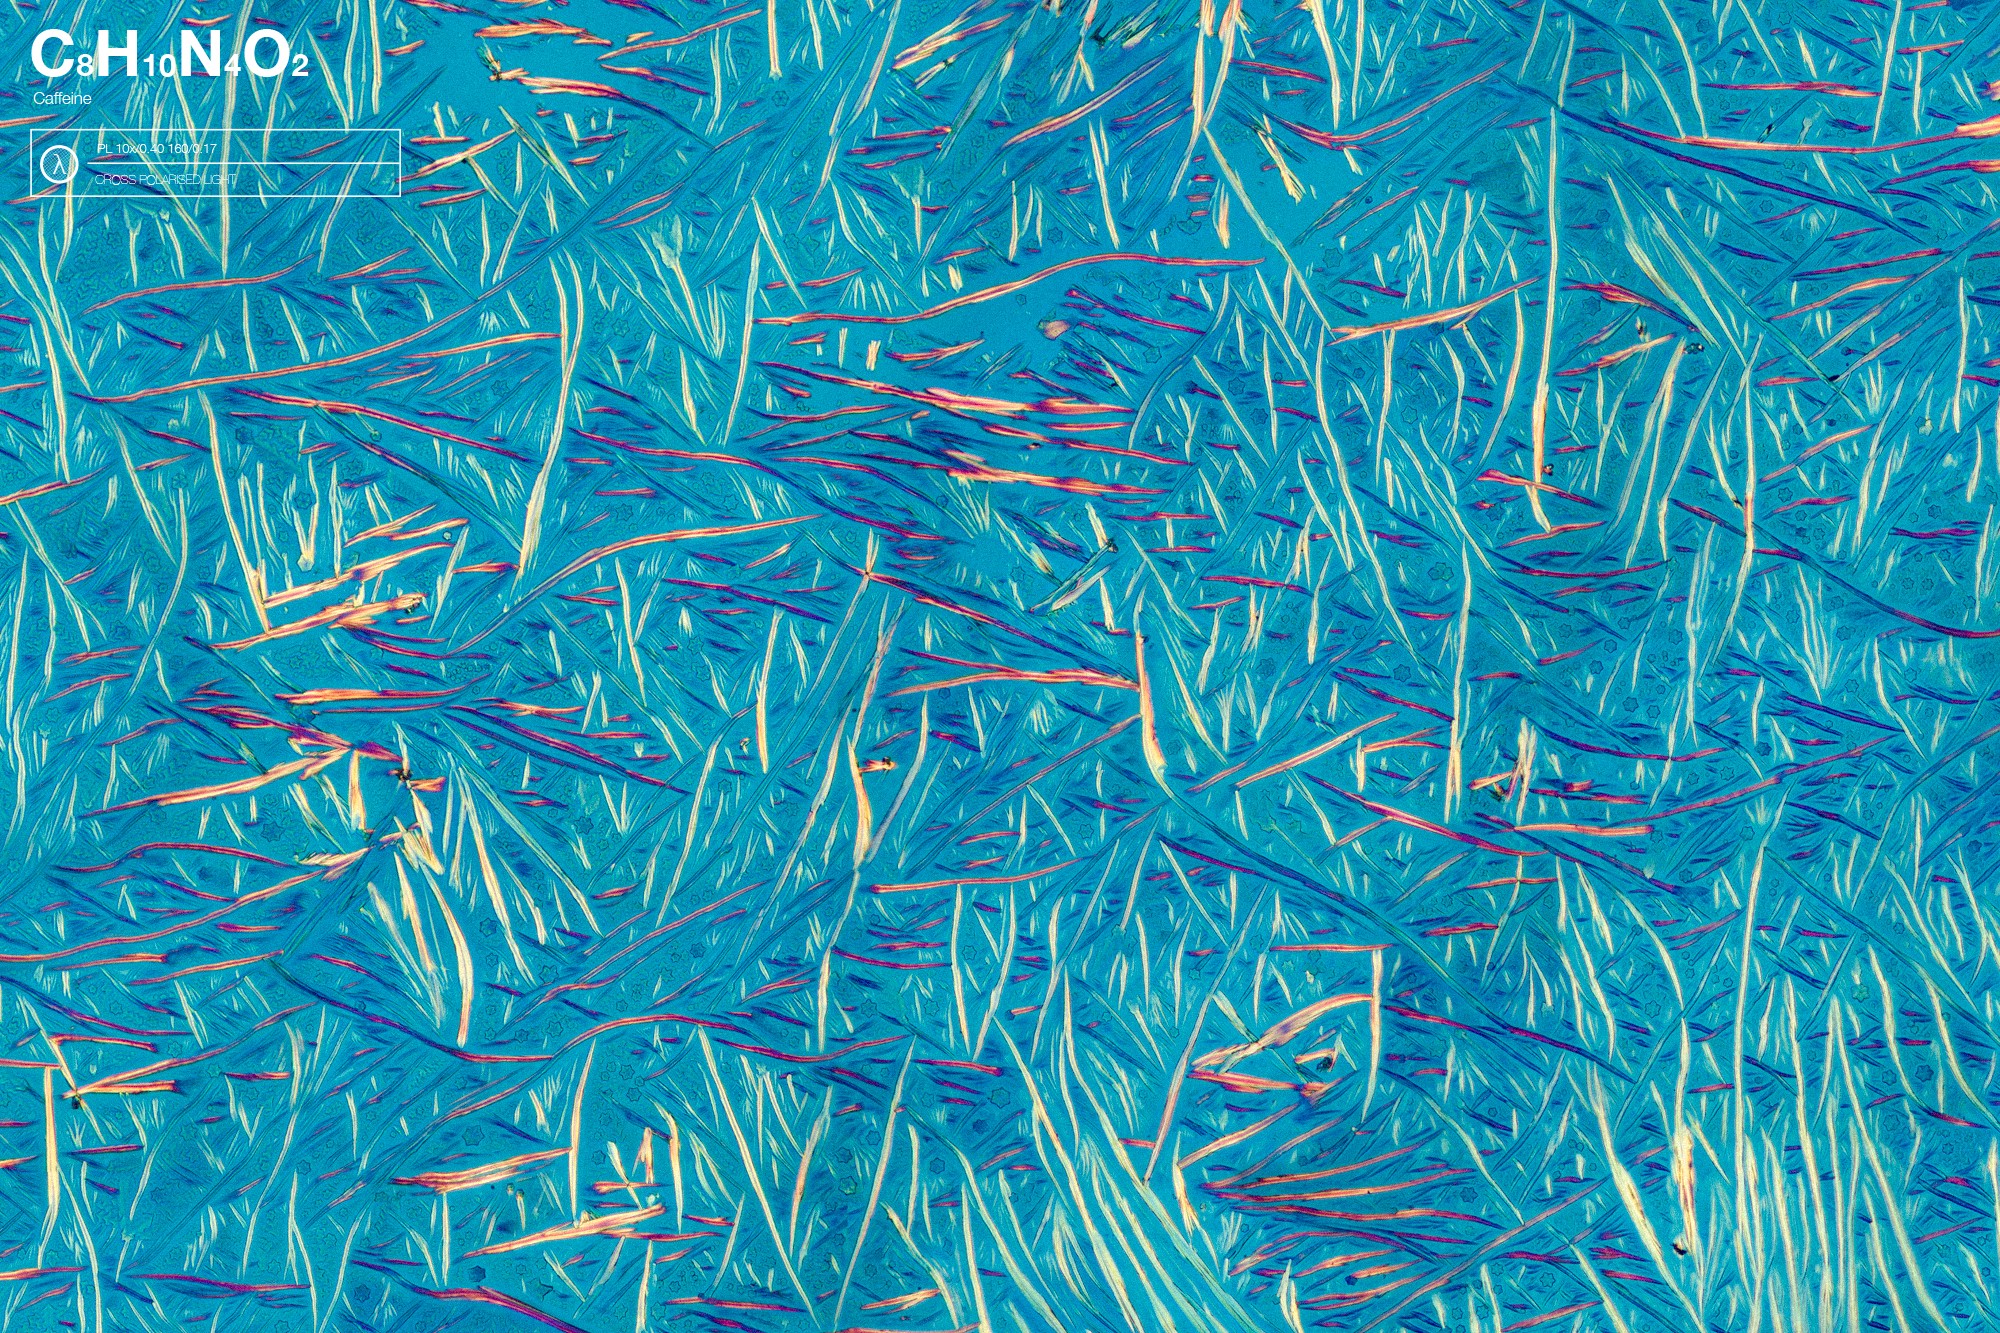 Caffeine crystals; formed out of 100% caffeine powder dissolved in demineralised water, made visible by using a cross polarised light microscope with an Berek filter.